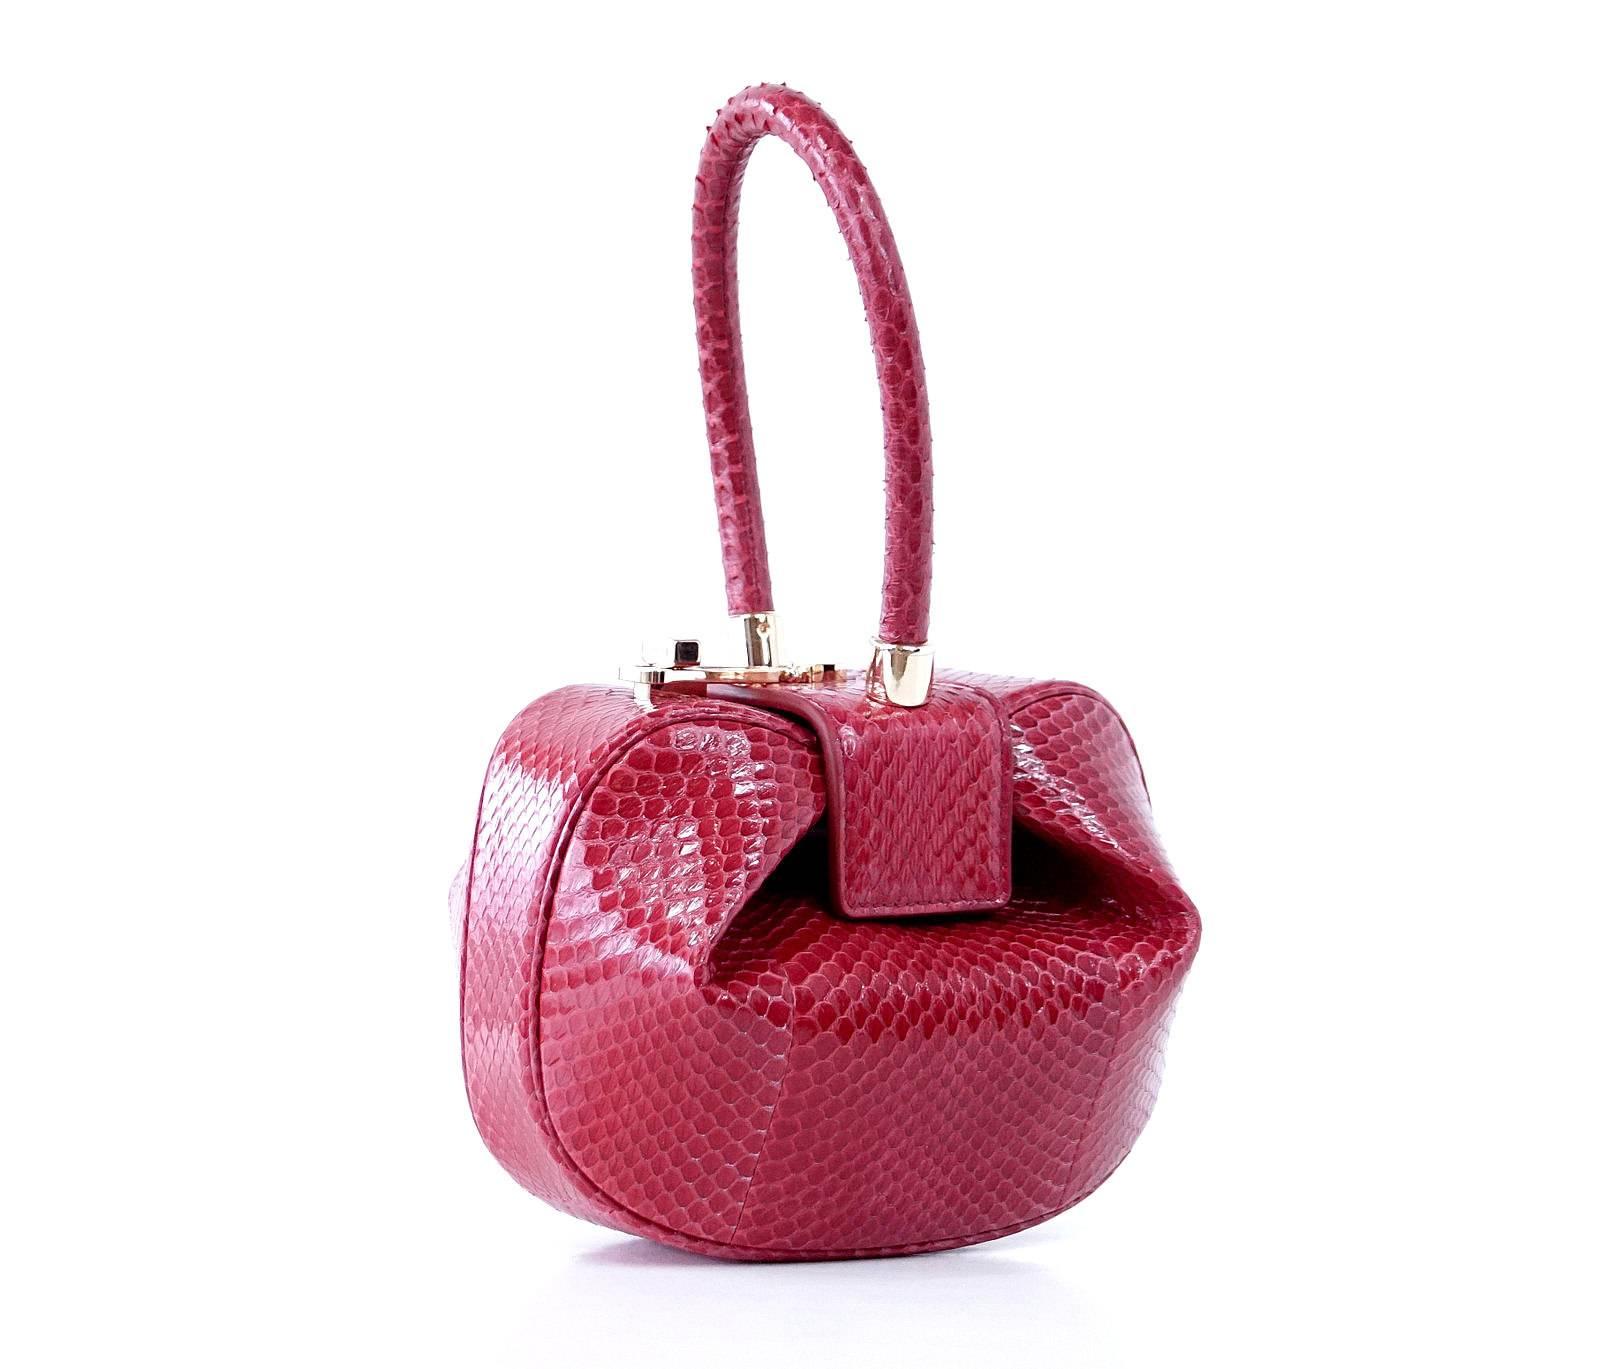 Guaranteed authentic Limited Edition Nina divine small evening bag is sultry red snakeskin.
Rose gold toned hardware with turn-lock top.
Iconic shape and rolled handle.
Interior is lined in matching leather with 2 card slots. 
NEW or NEVER WORN.